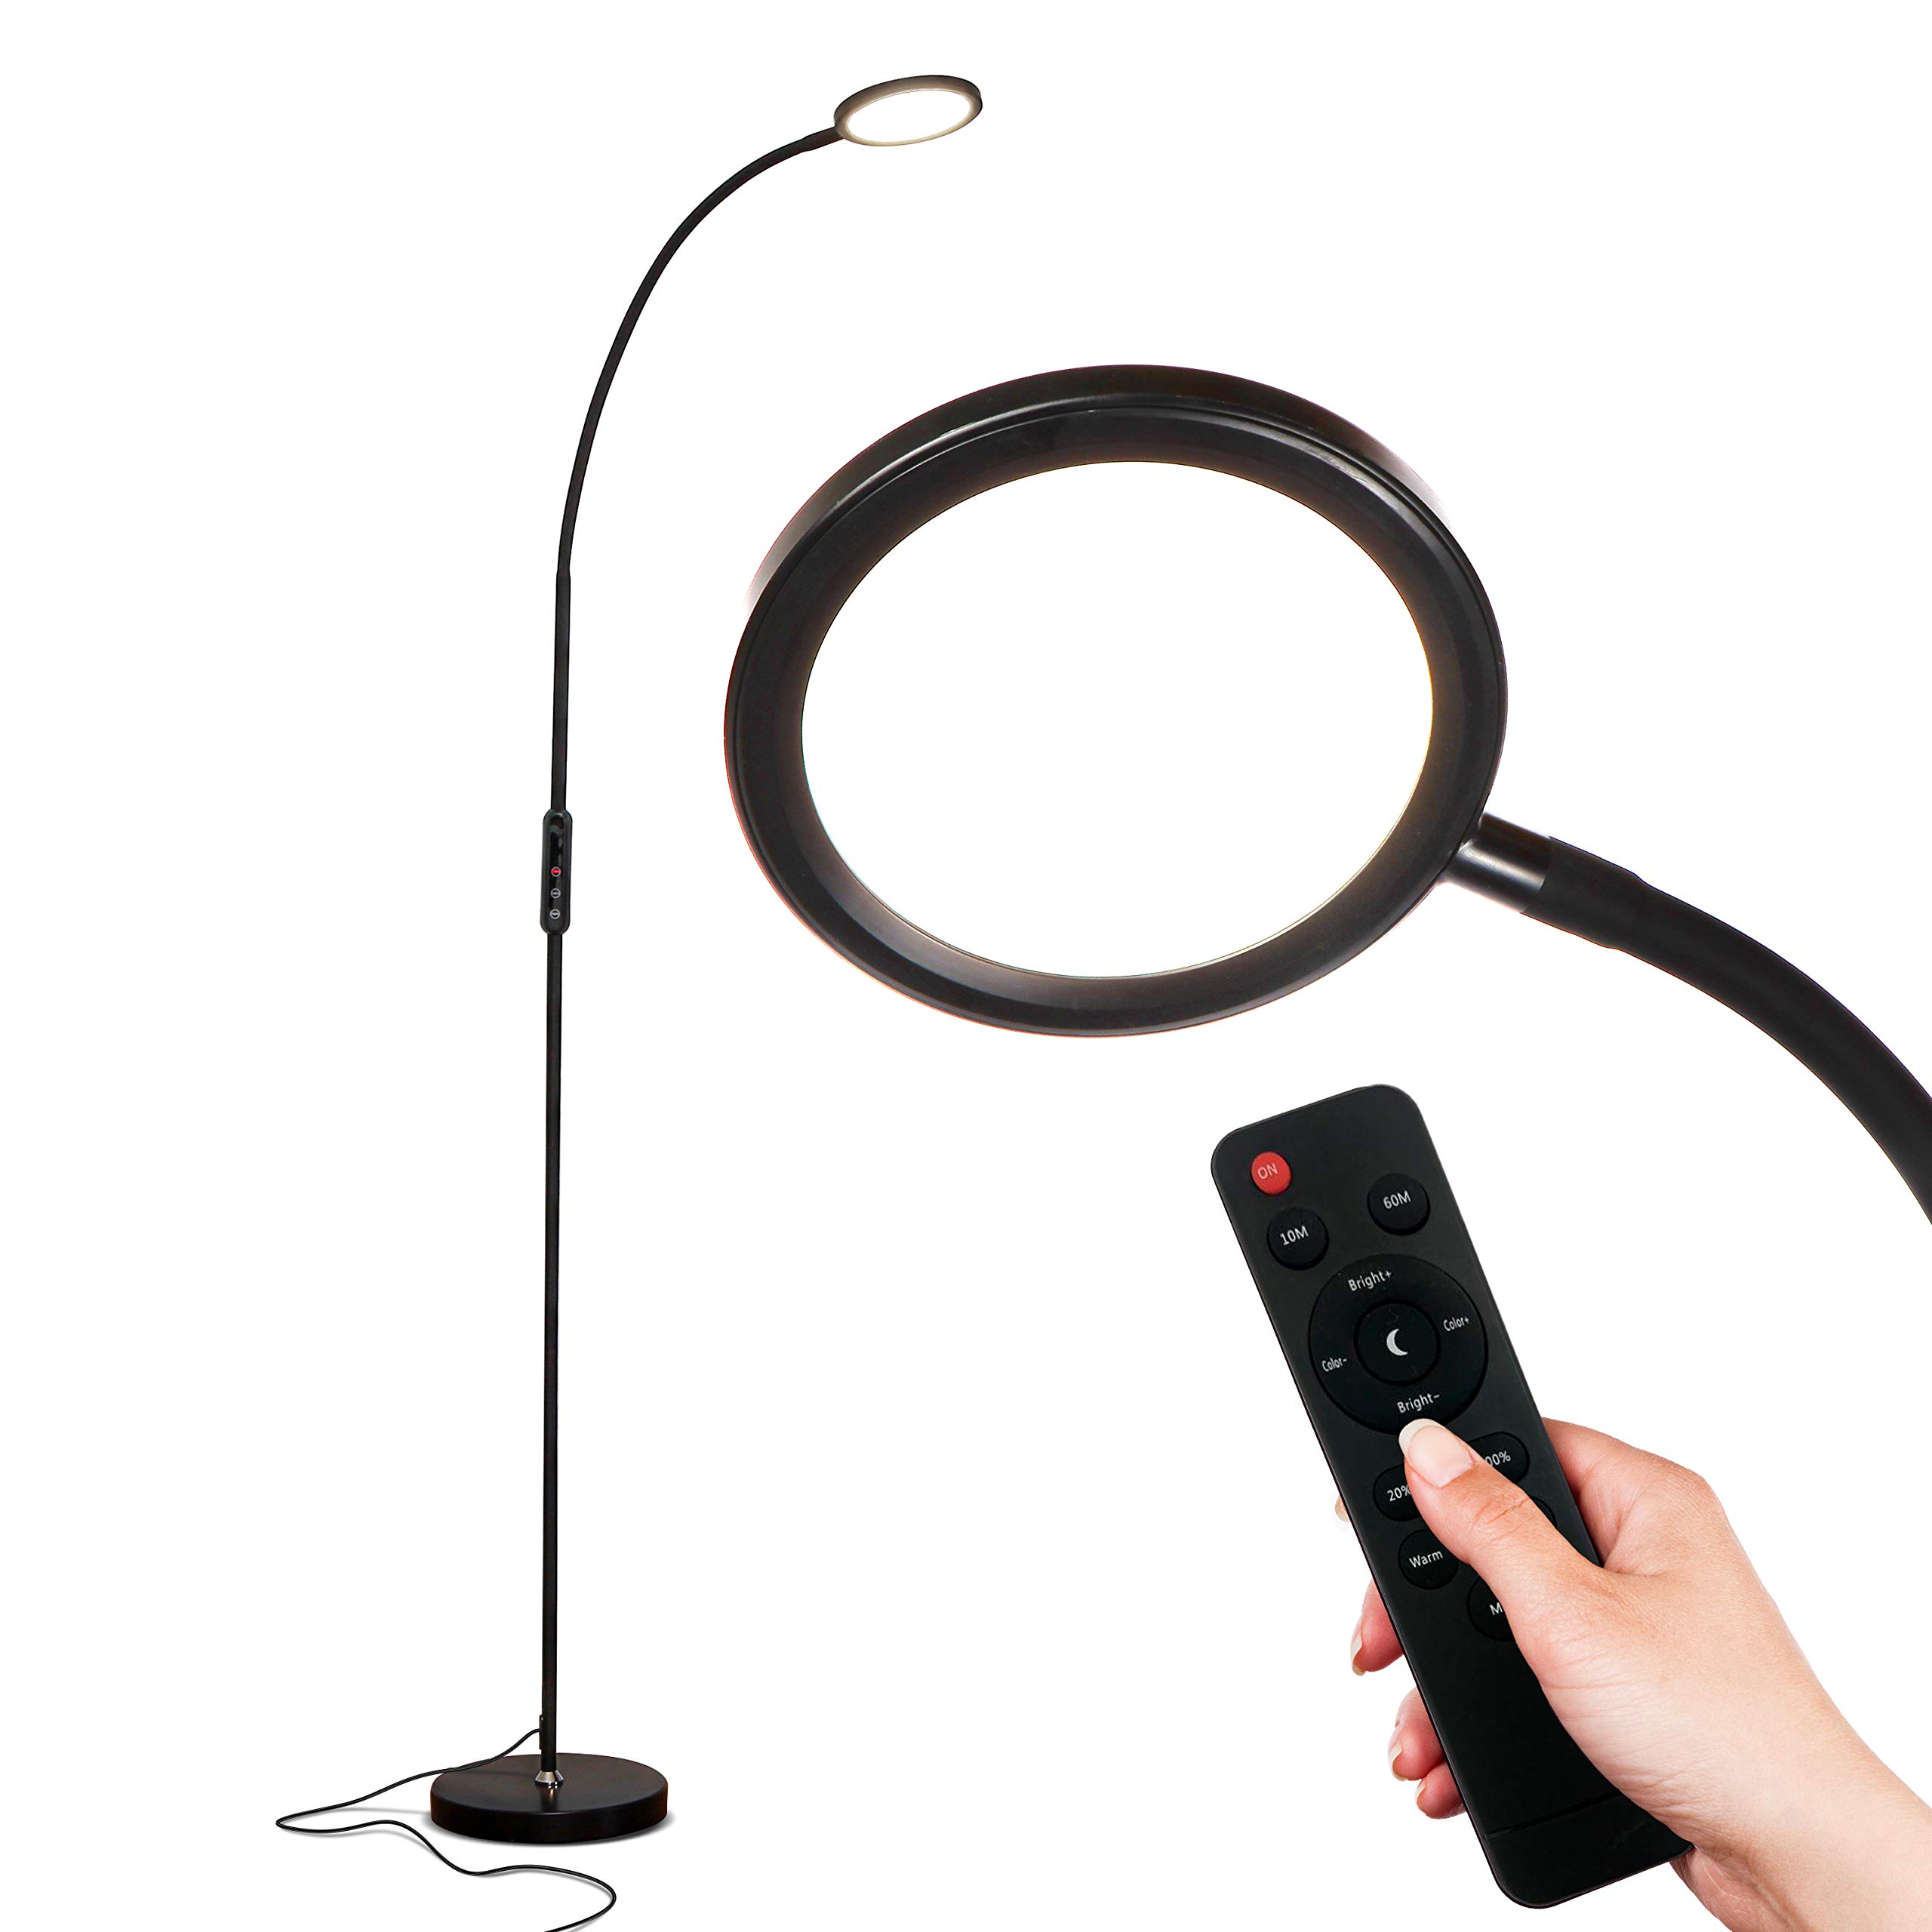 Brightech Vista - Bright LED Floor Lamp for Crafts & Reading - Remote Control 25 Light Color & Dimming Options: Get The Right Light for You - Adjus...